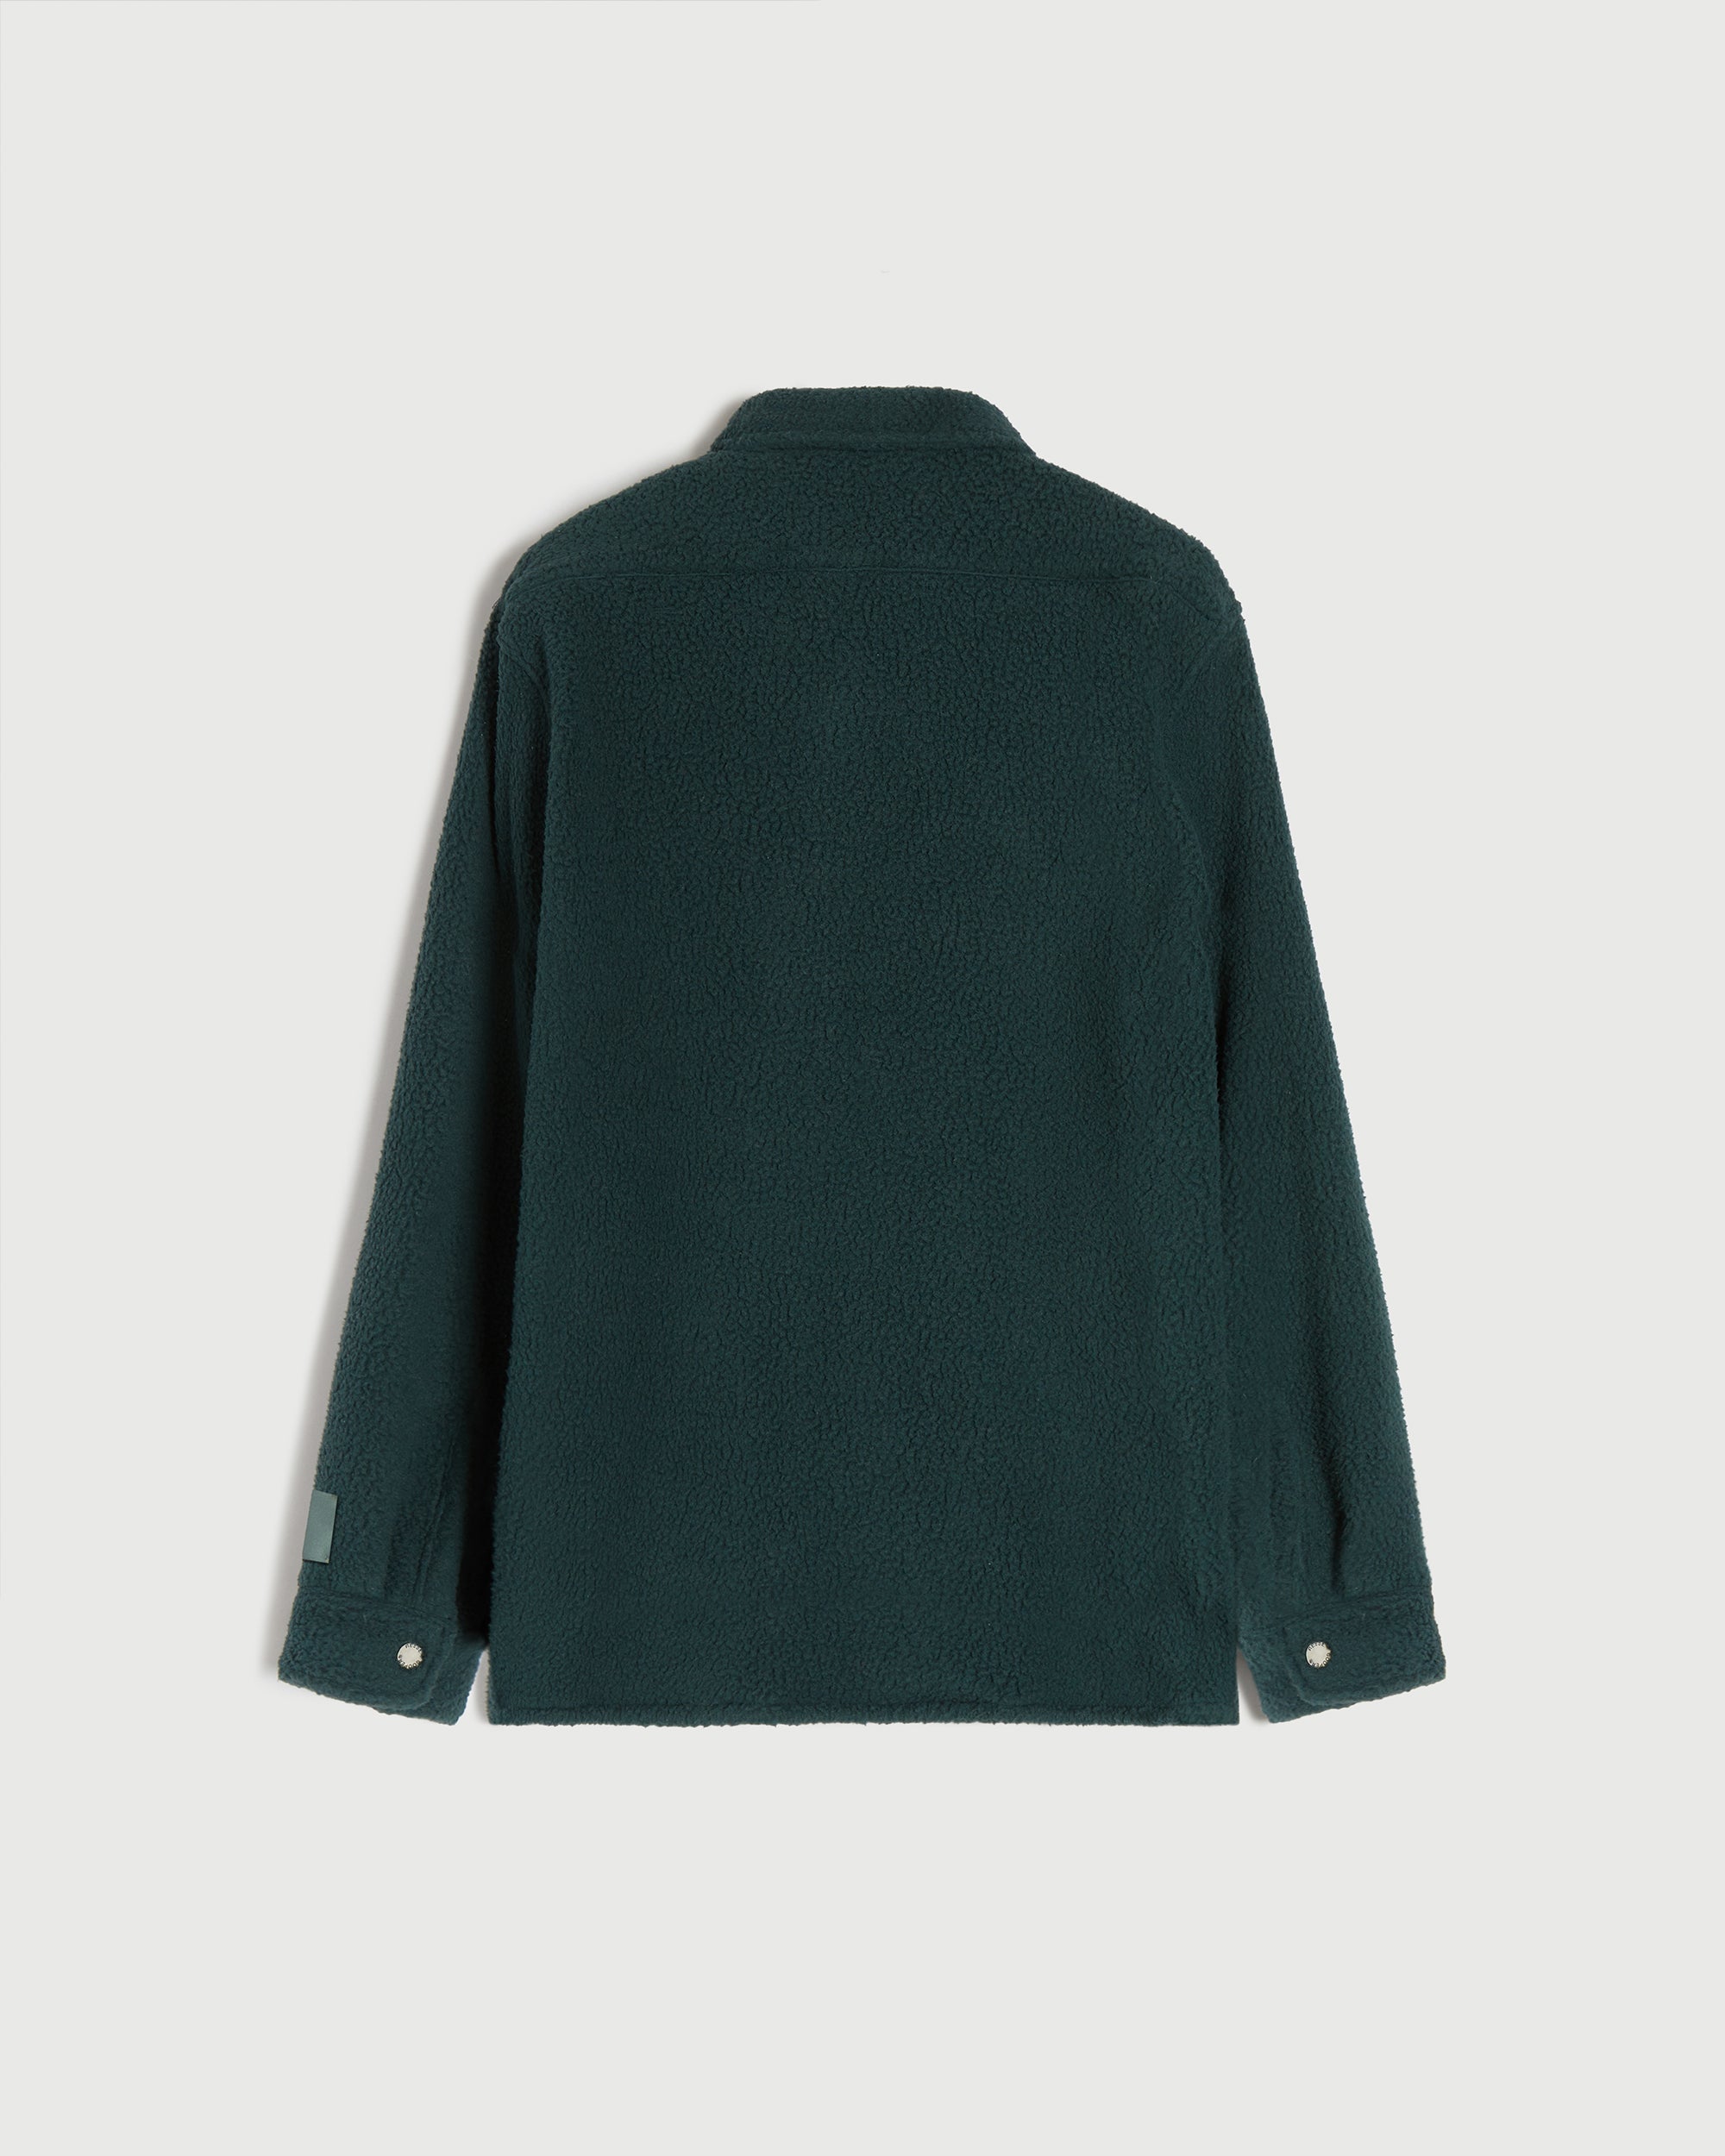 RCI Reserve: Button Down Shirt in Forest Green Sherpa Fleece